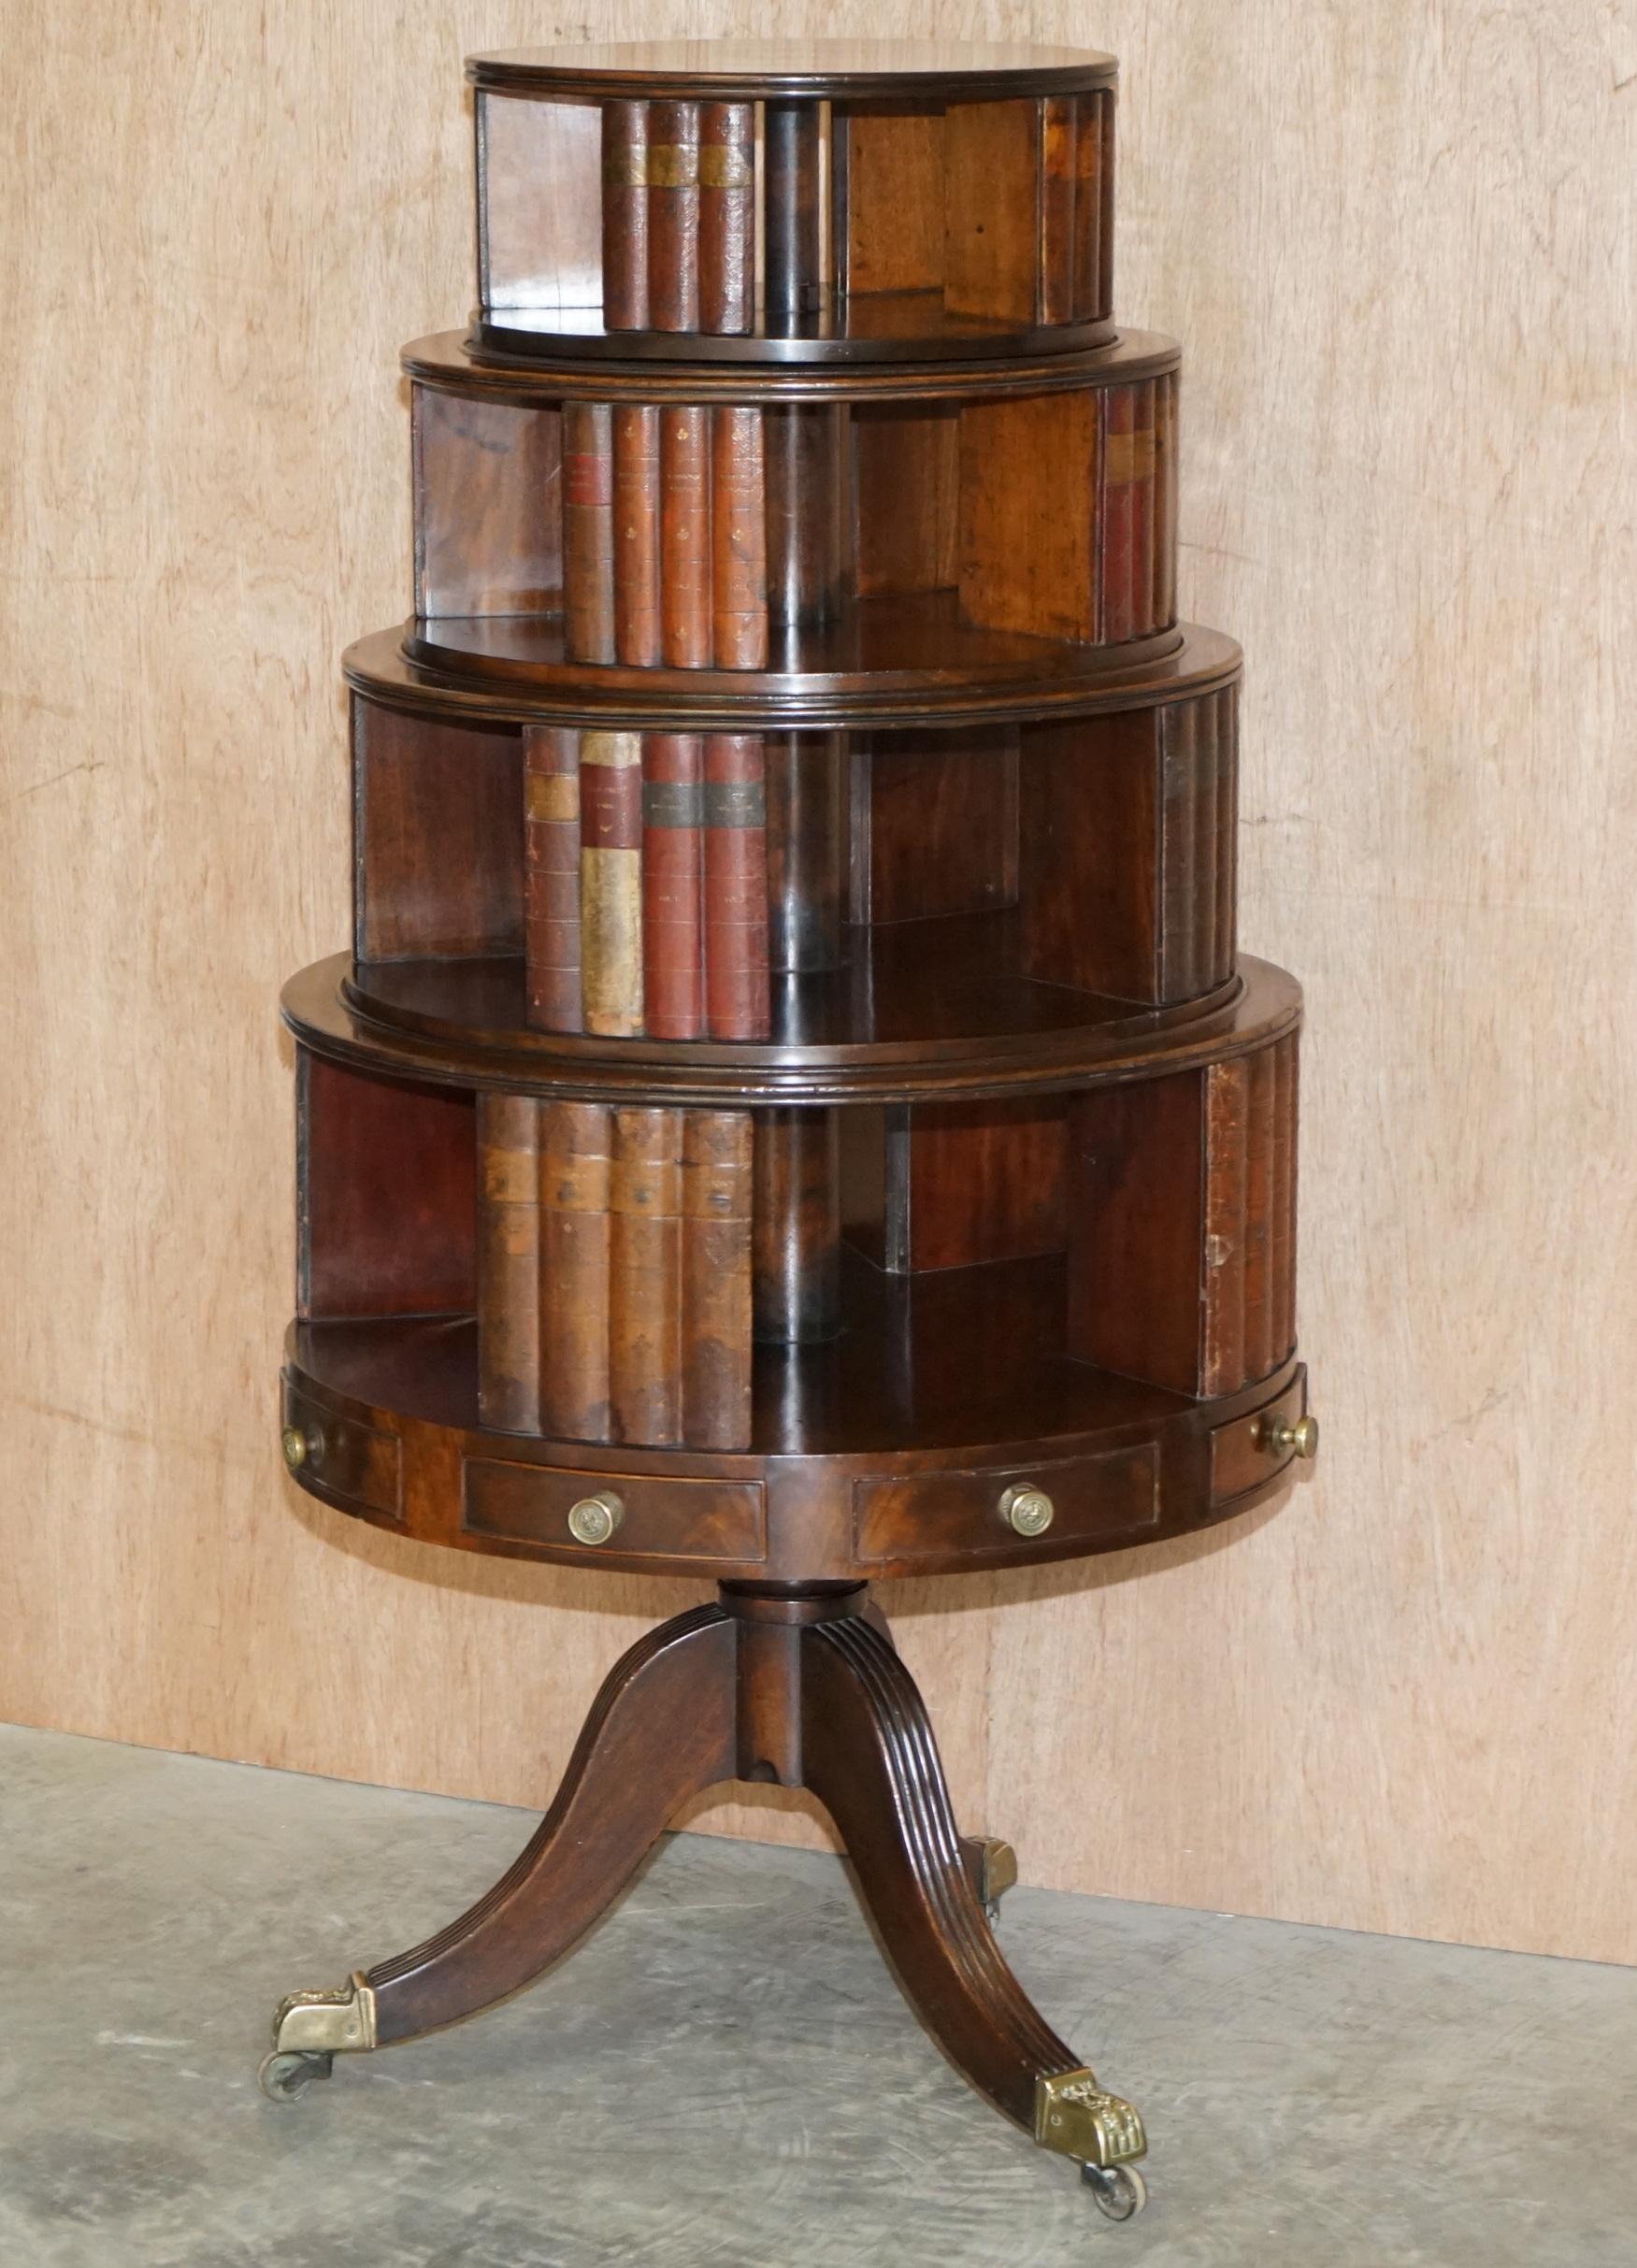 We are delighted to offer this very fine, highly collectable original Regency circa 1810 revolving library bookcase in mahogany with leather faux books

If you are looking at this listing then most likely you know what this is, these are